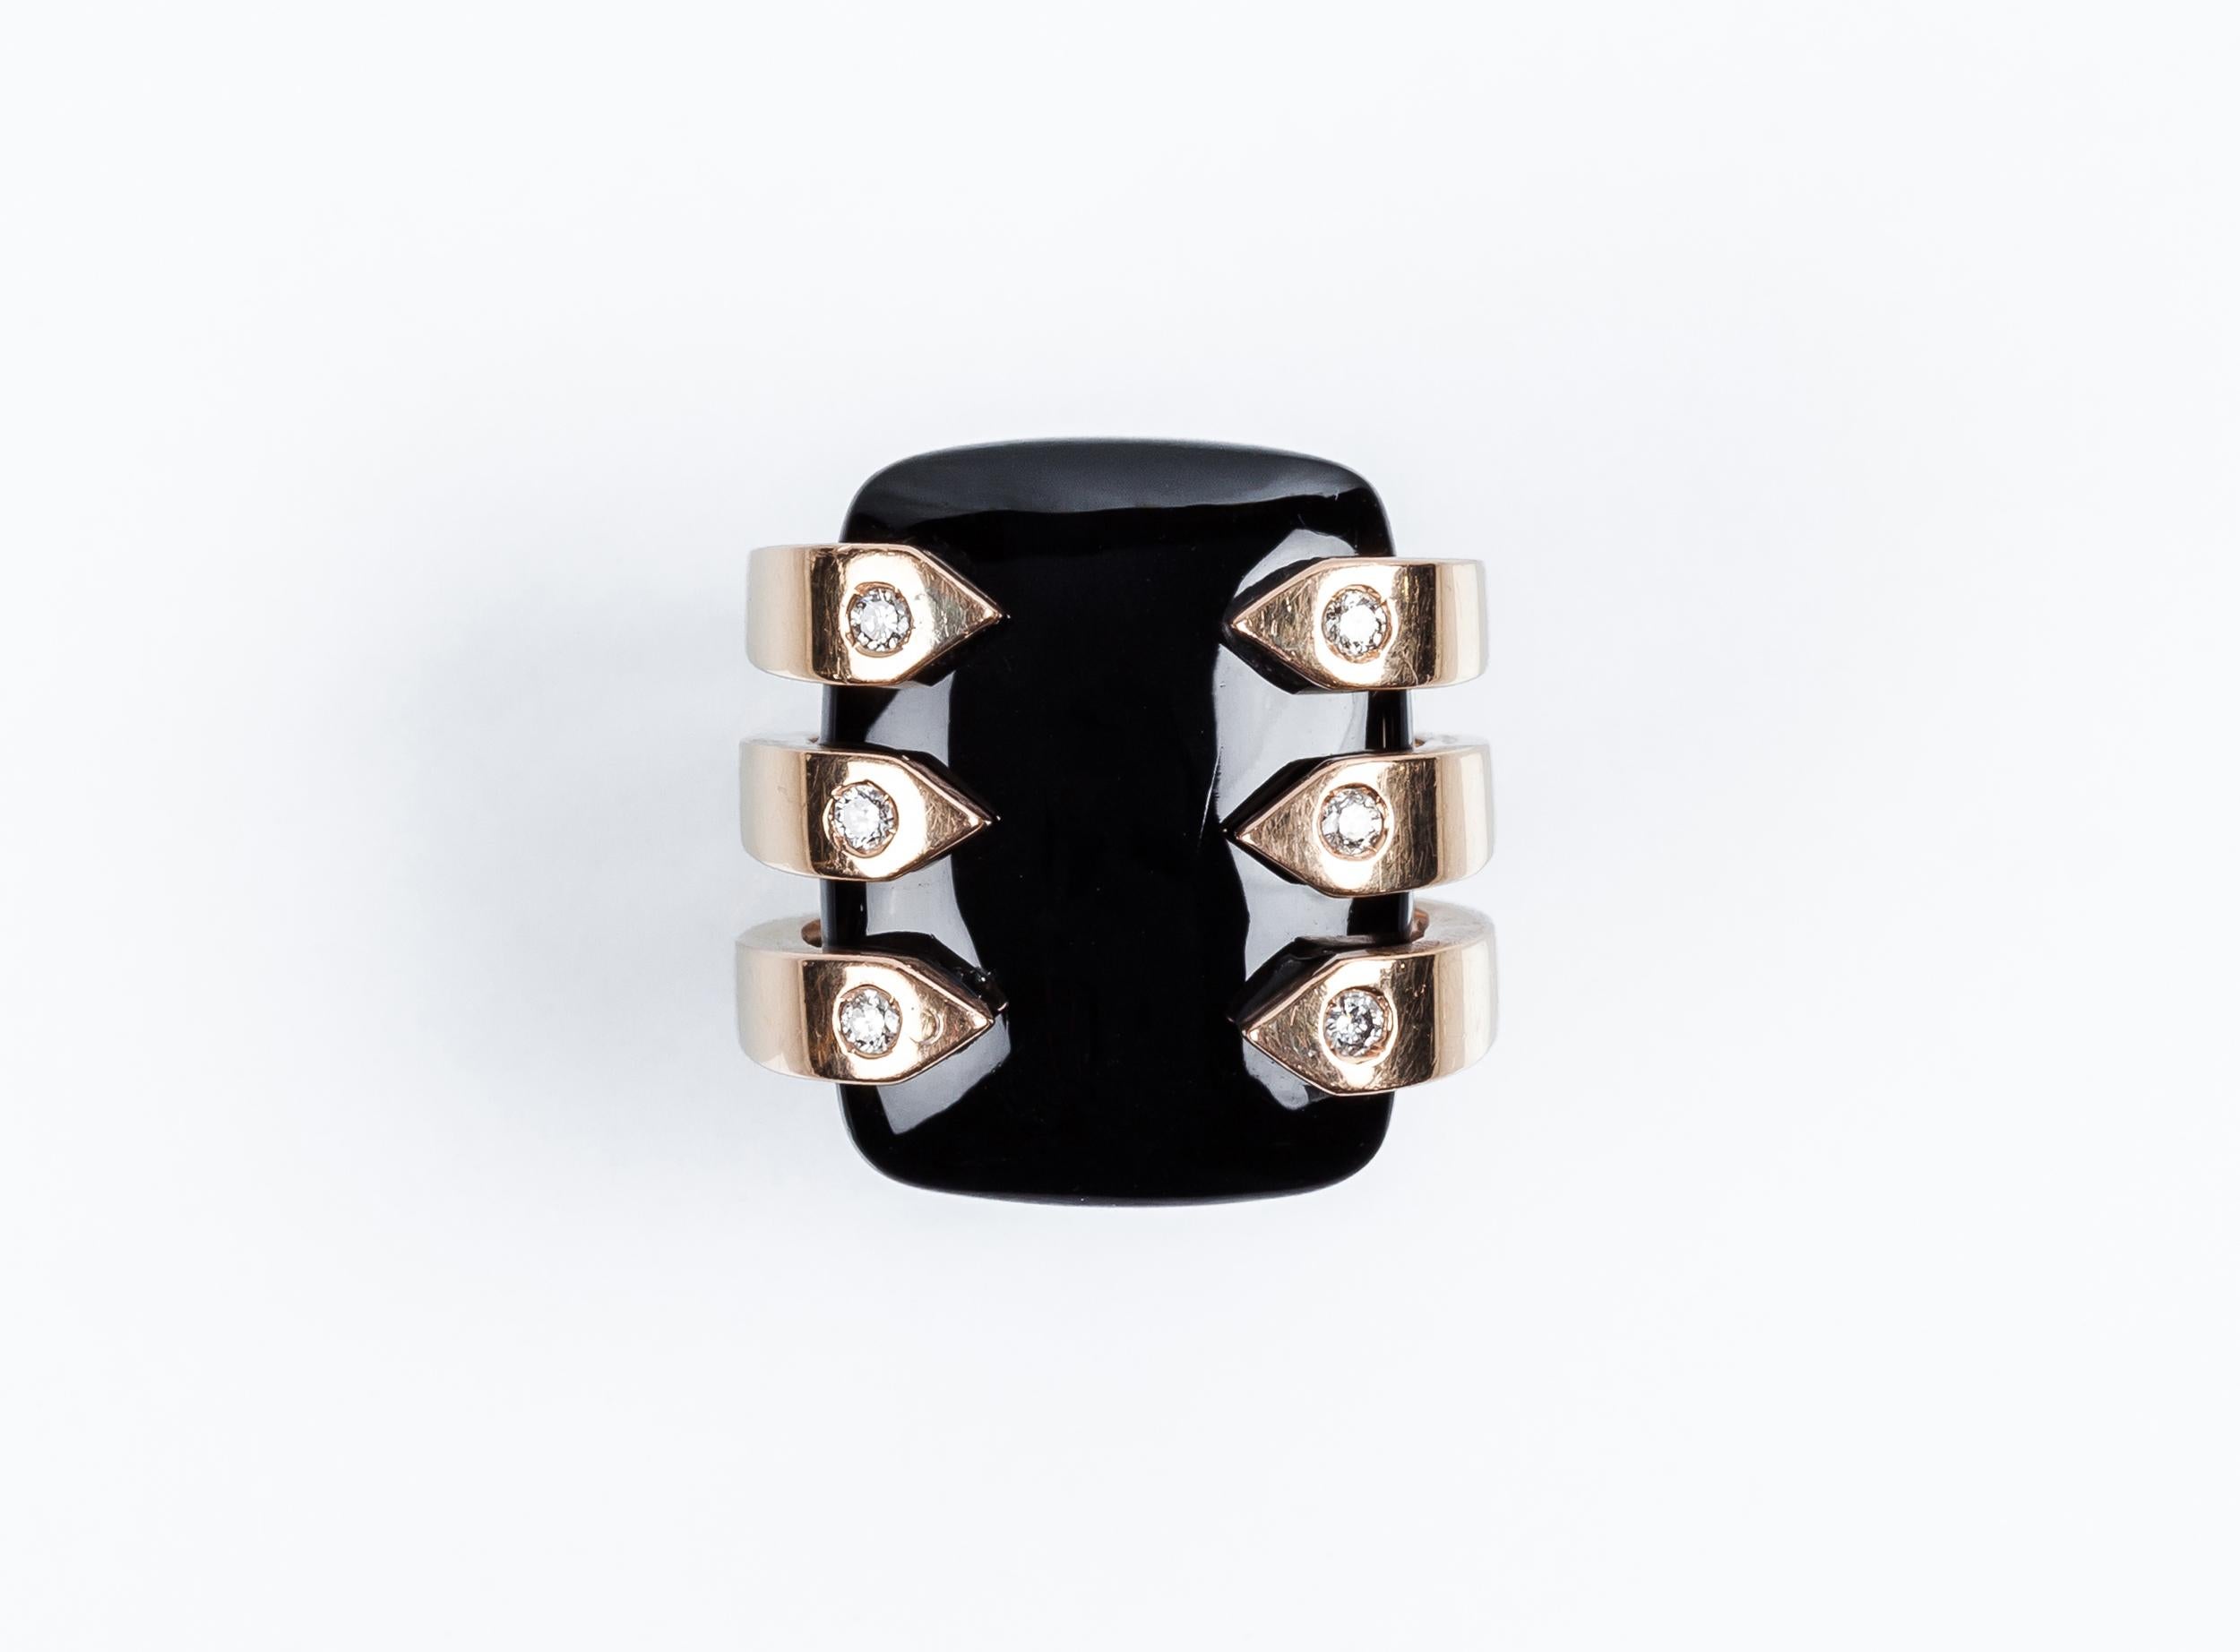 Six Eyes watching onyx and diamonds Rose Gold  Ring
Egiptian inspired amulet ring with six eyes of diamonds protecting you. 
The Eye of Ra is an ancient Egyptian symbol loaded with potent symbolism and historical significance. The female counterpart